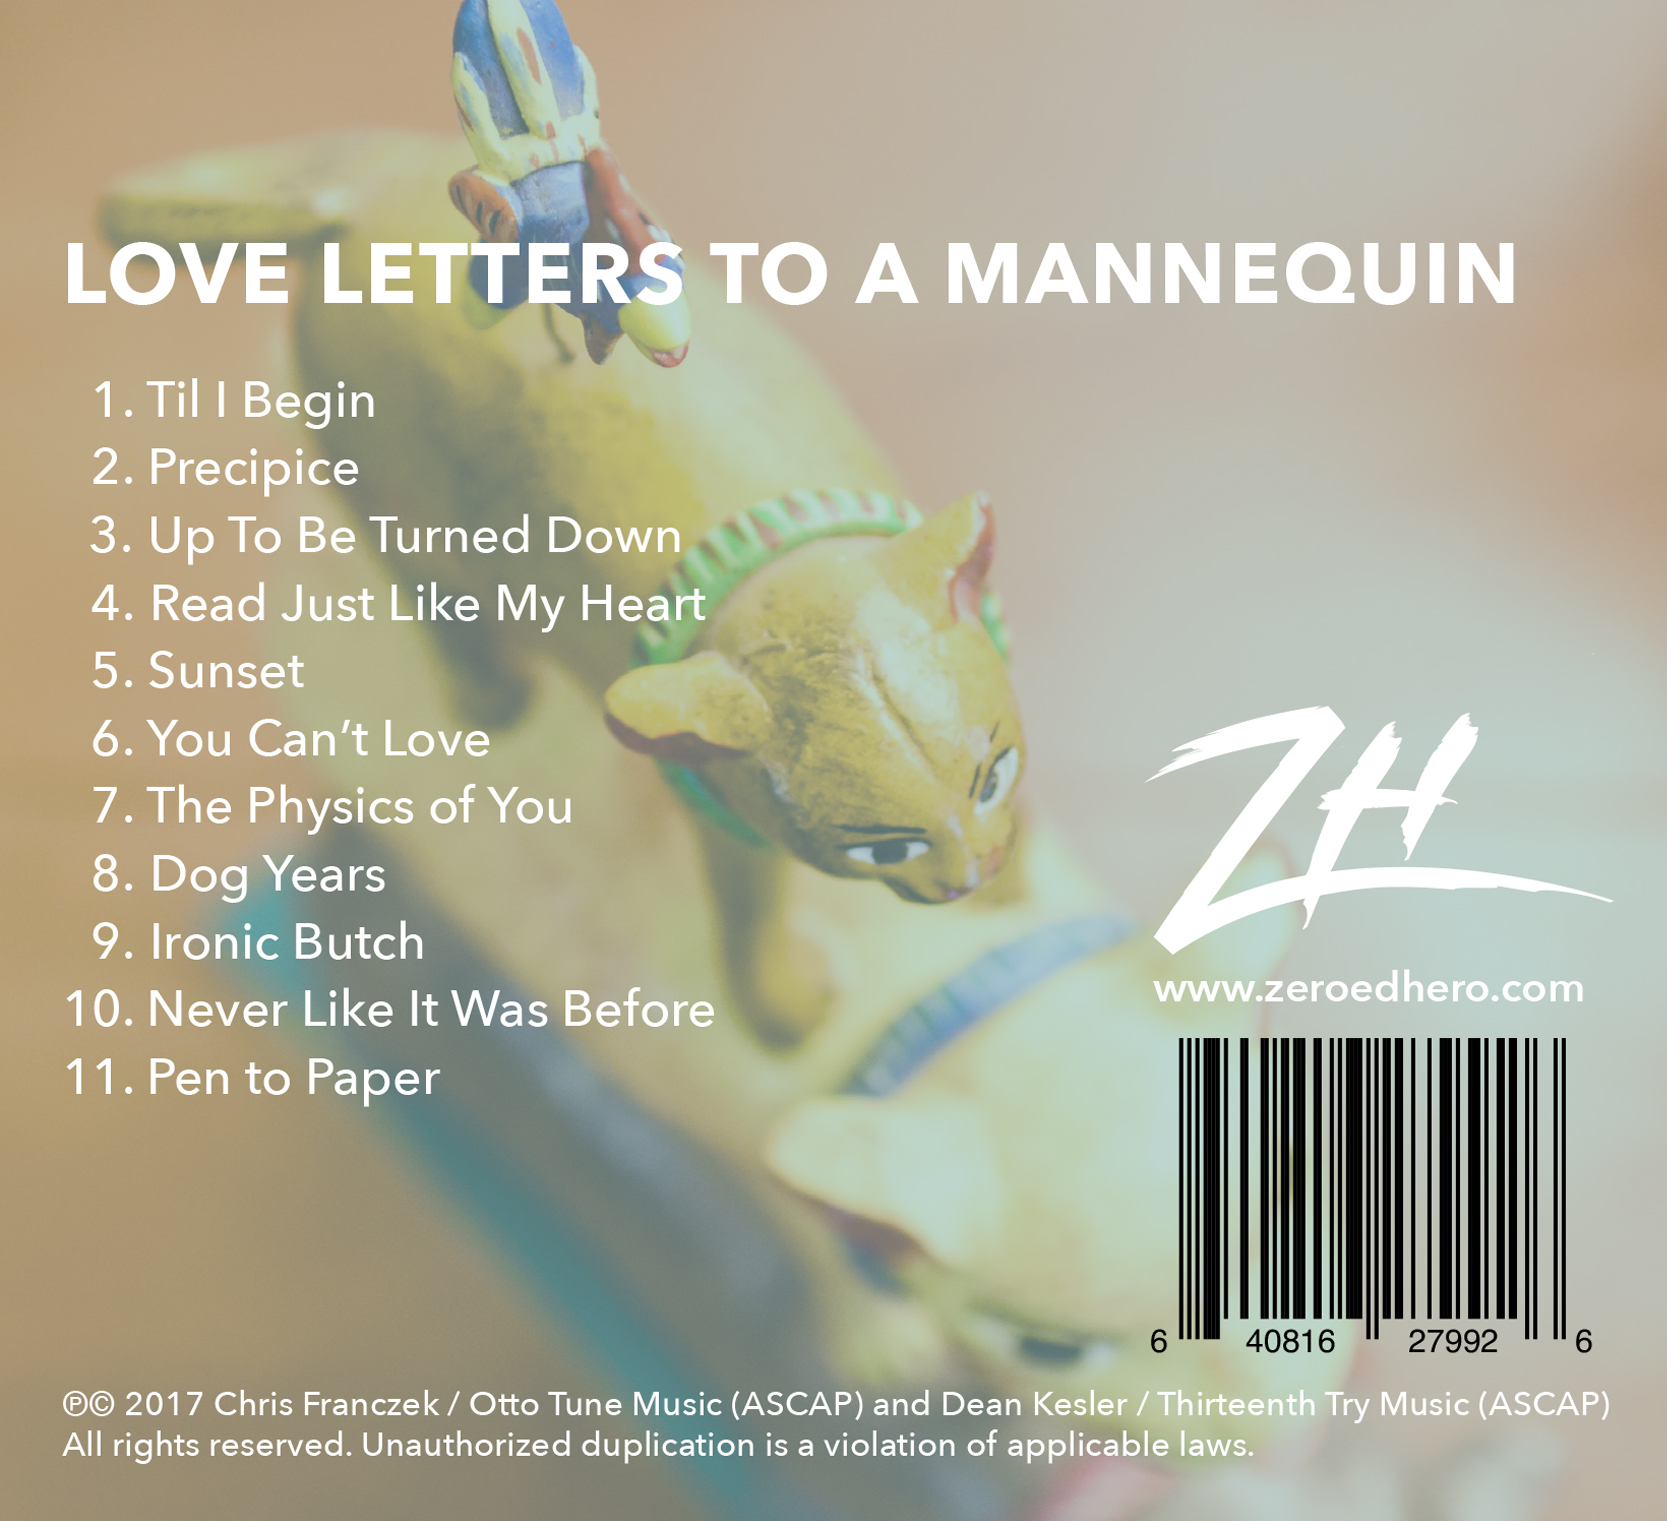 Love Letters to a Mannequin<br>
Back cover